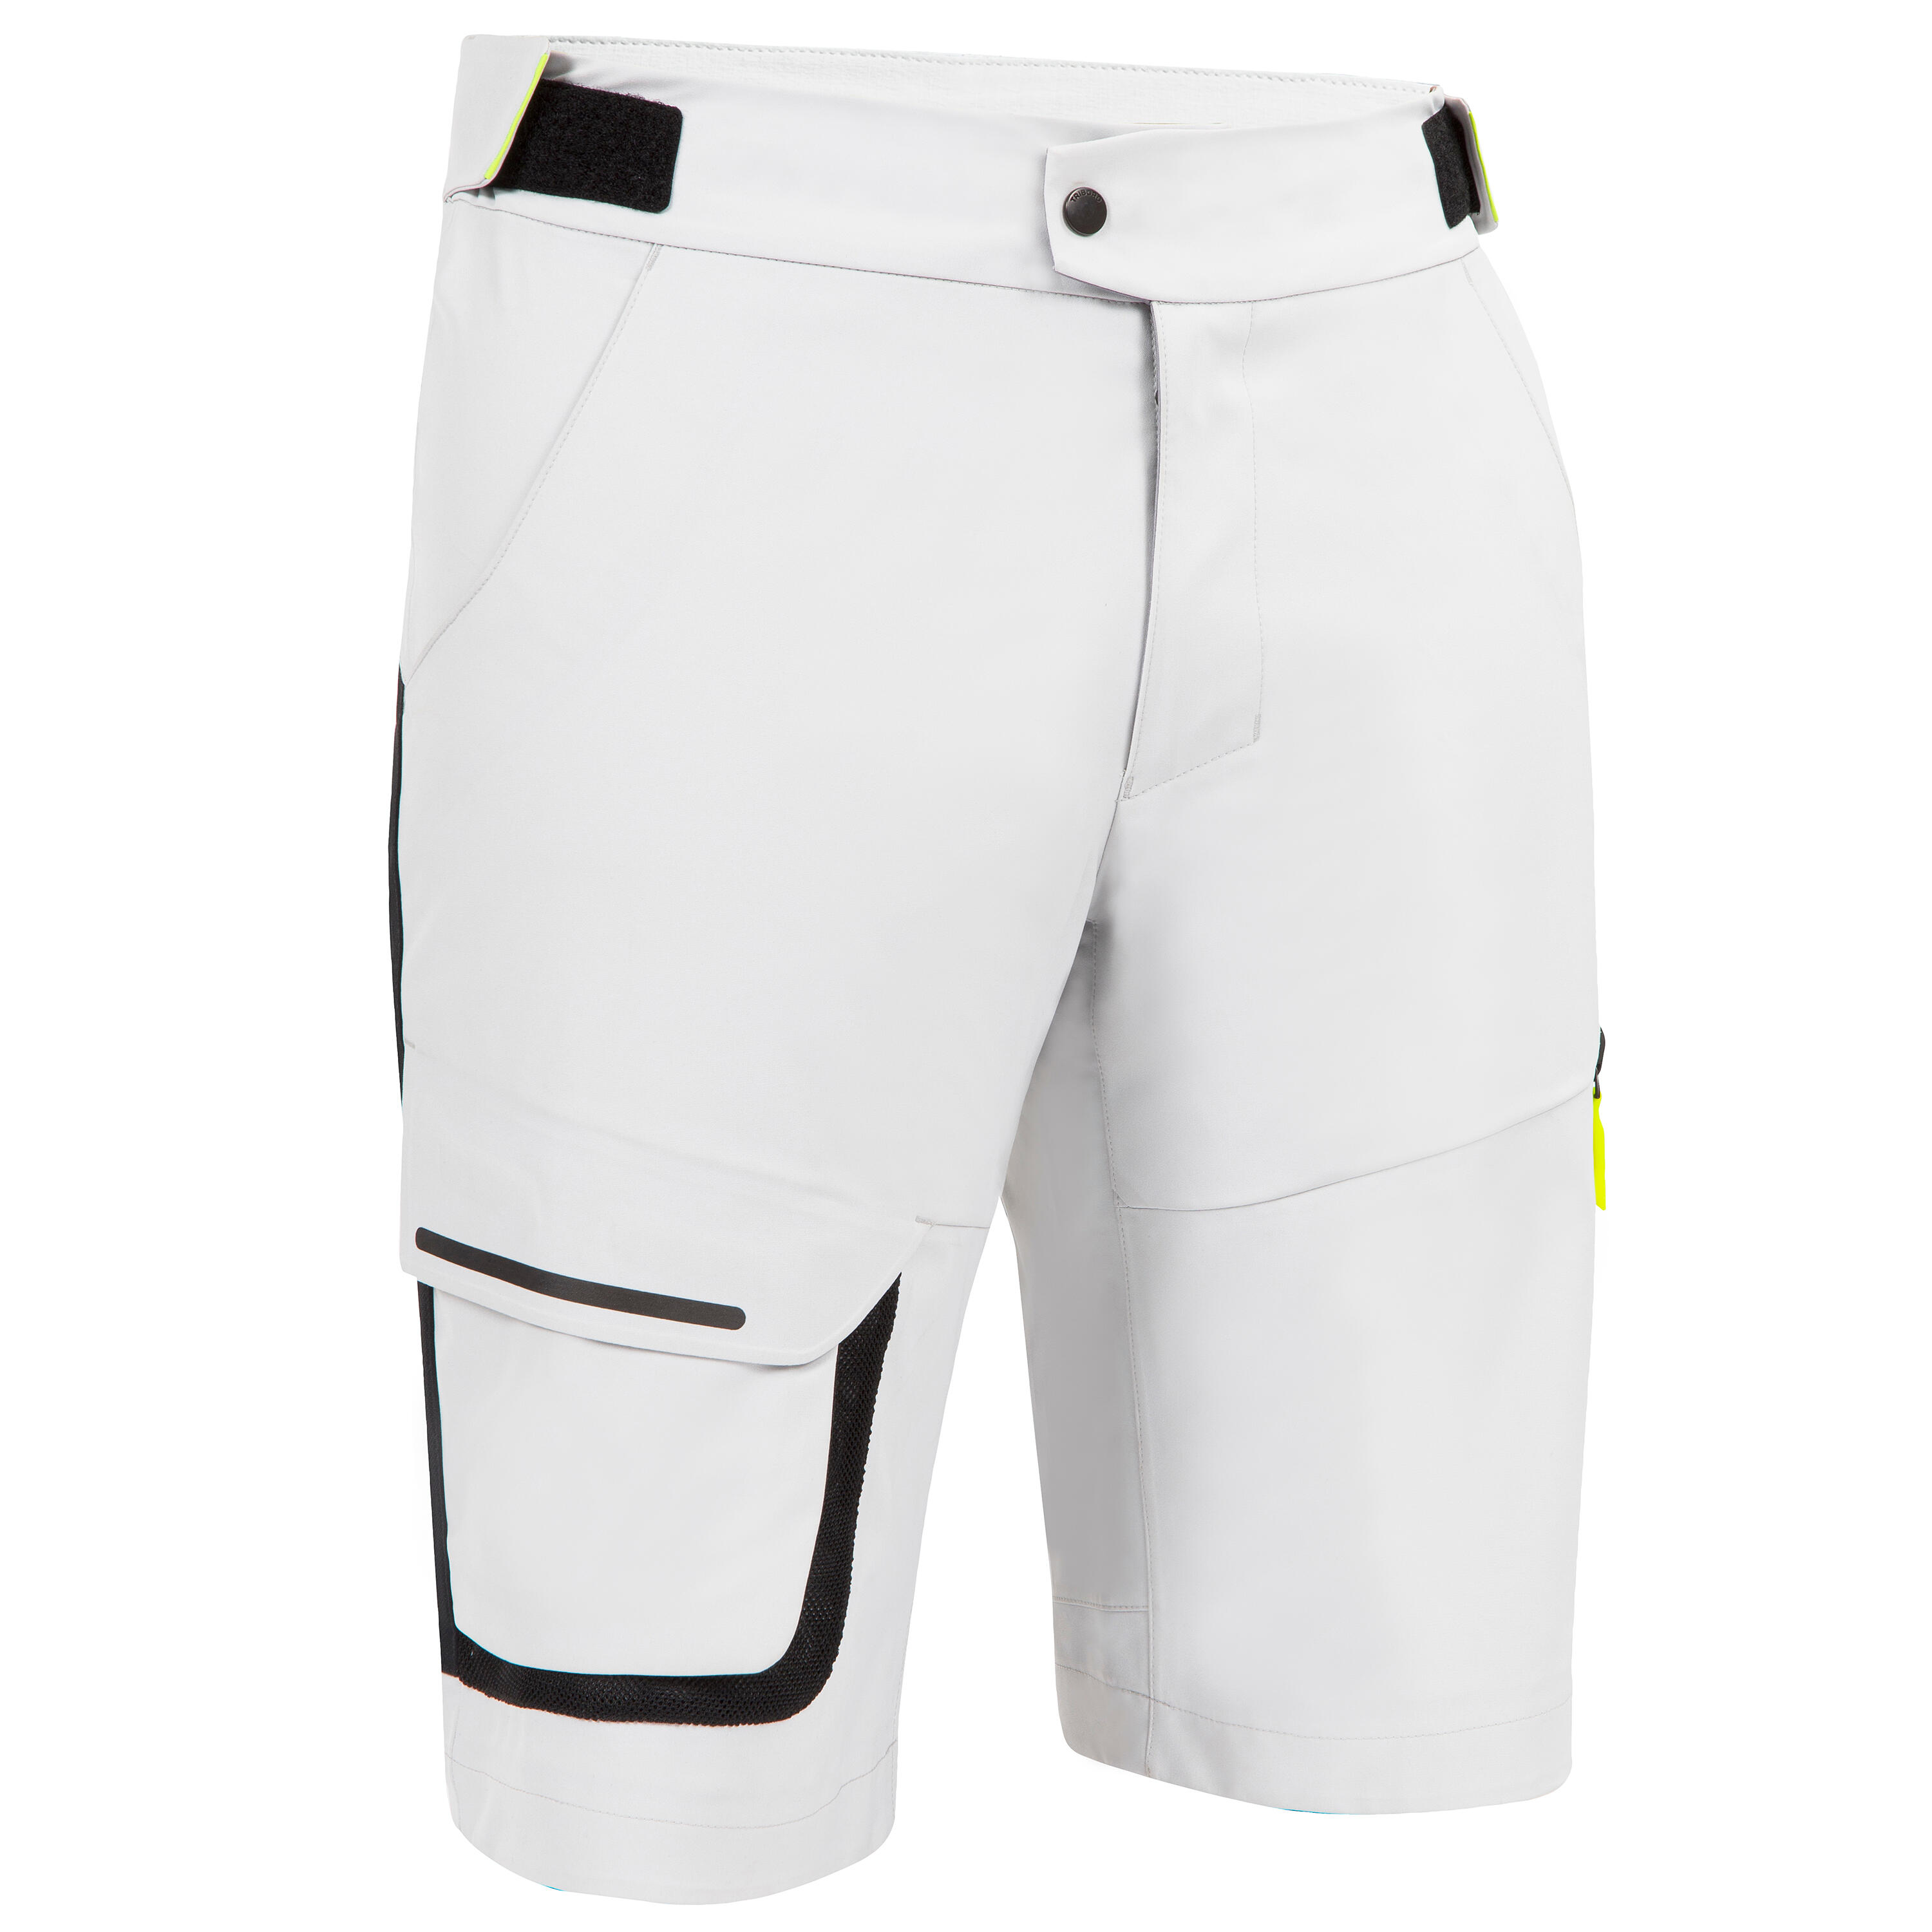 Update more than 96 decathlon sailing trousers best - in.duhocakina